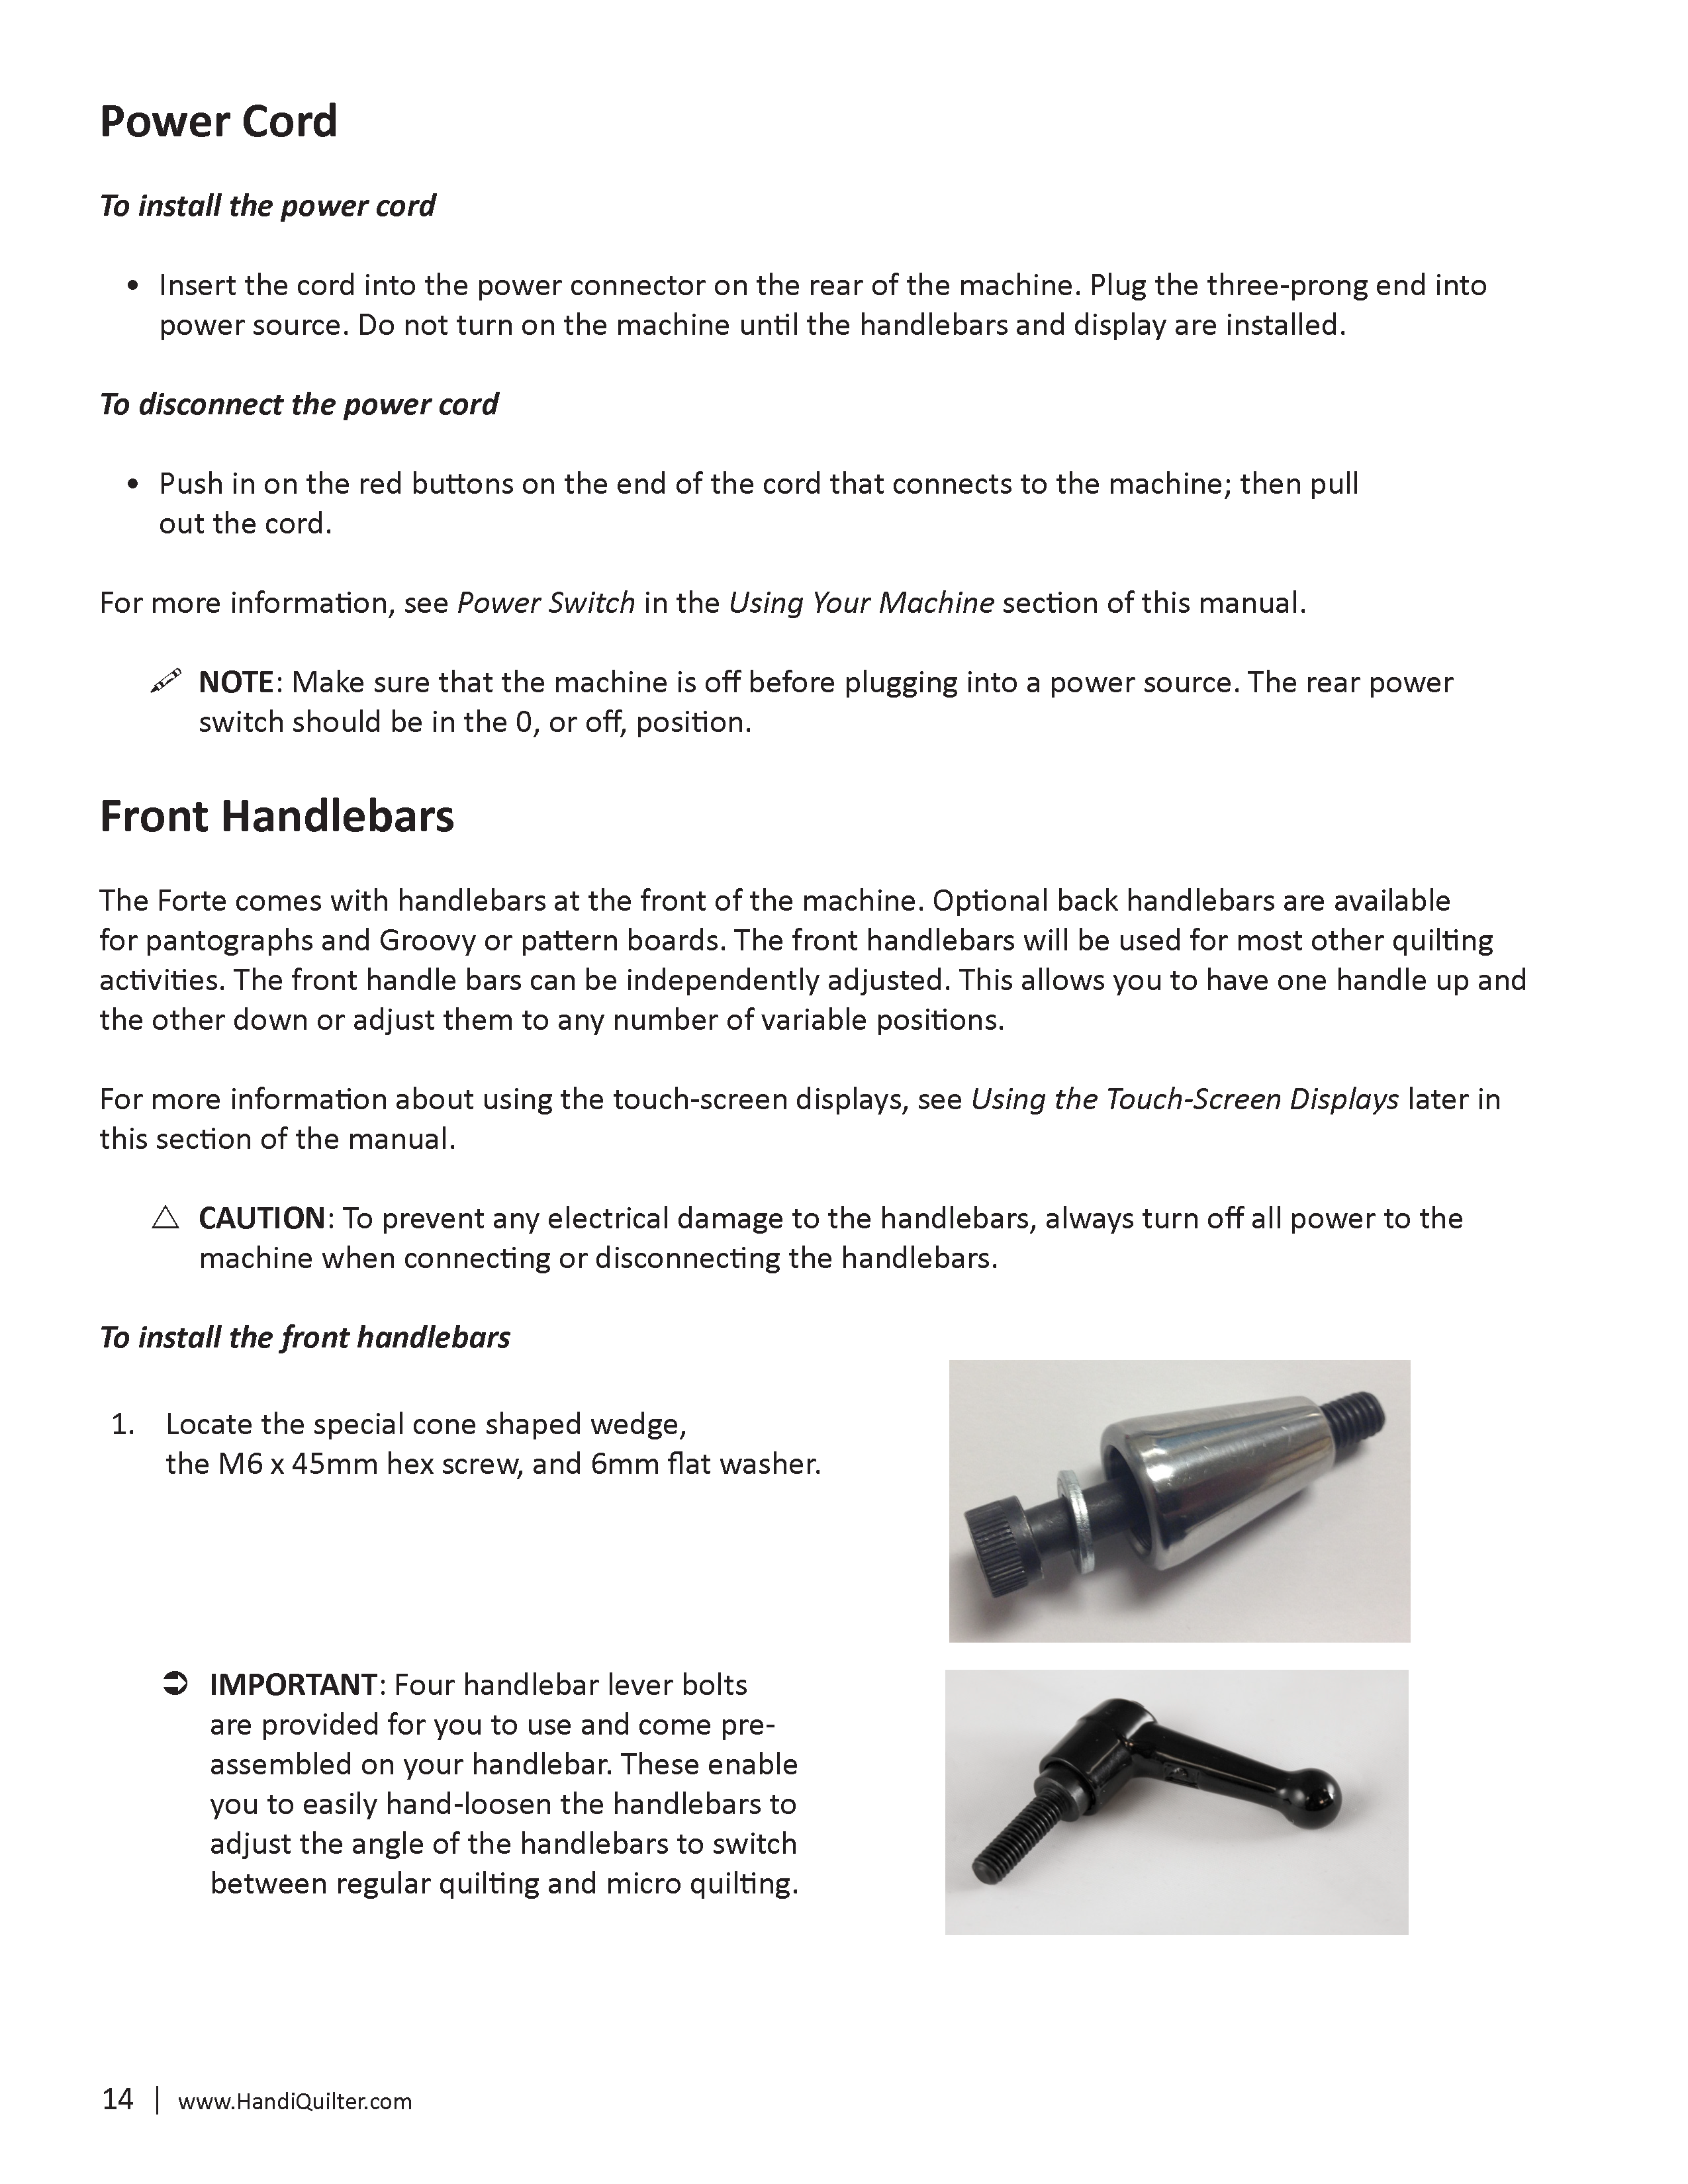 HQ-Forte-User-Manual-ALL-2_Page_15.png